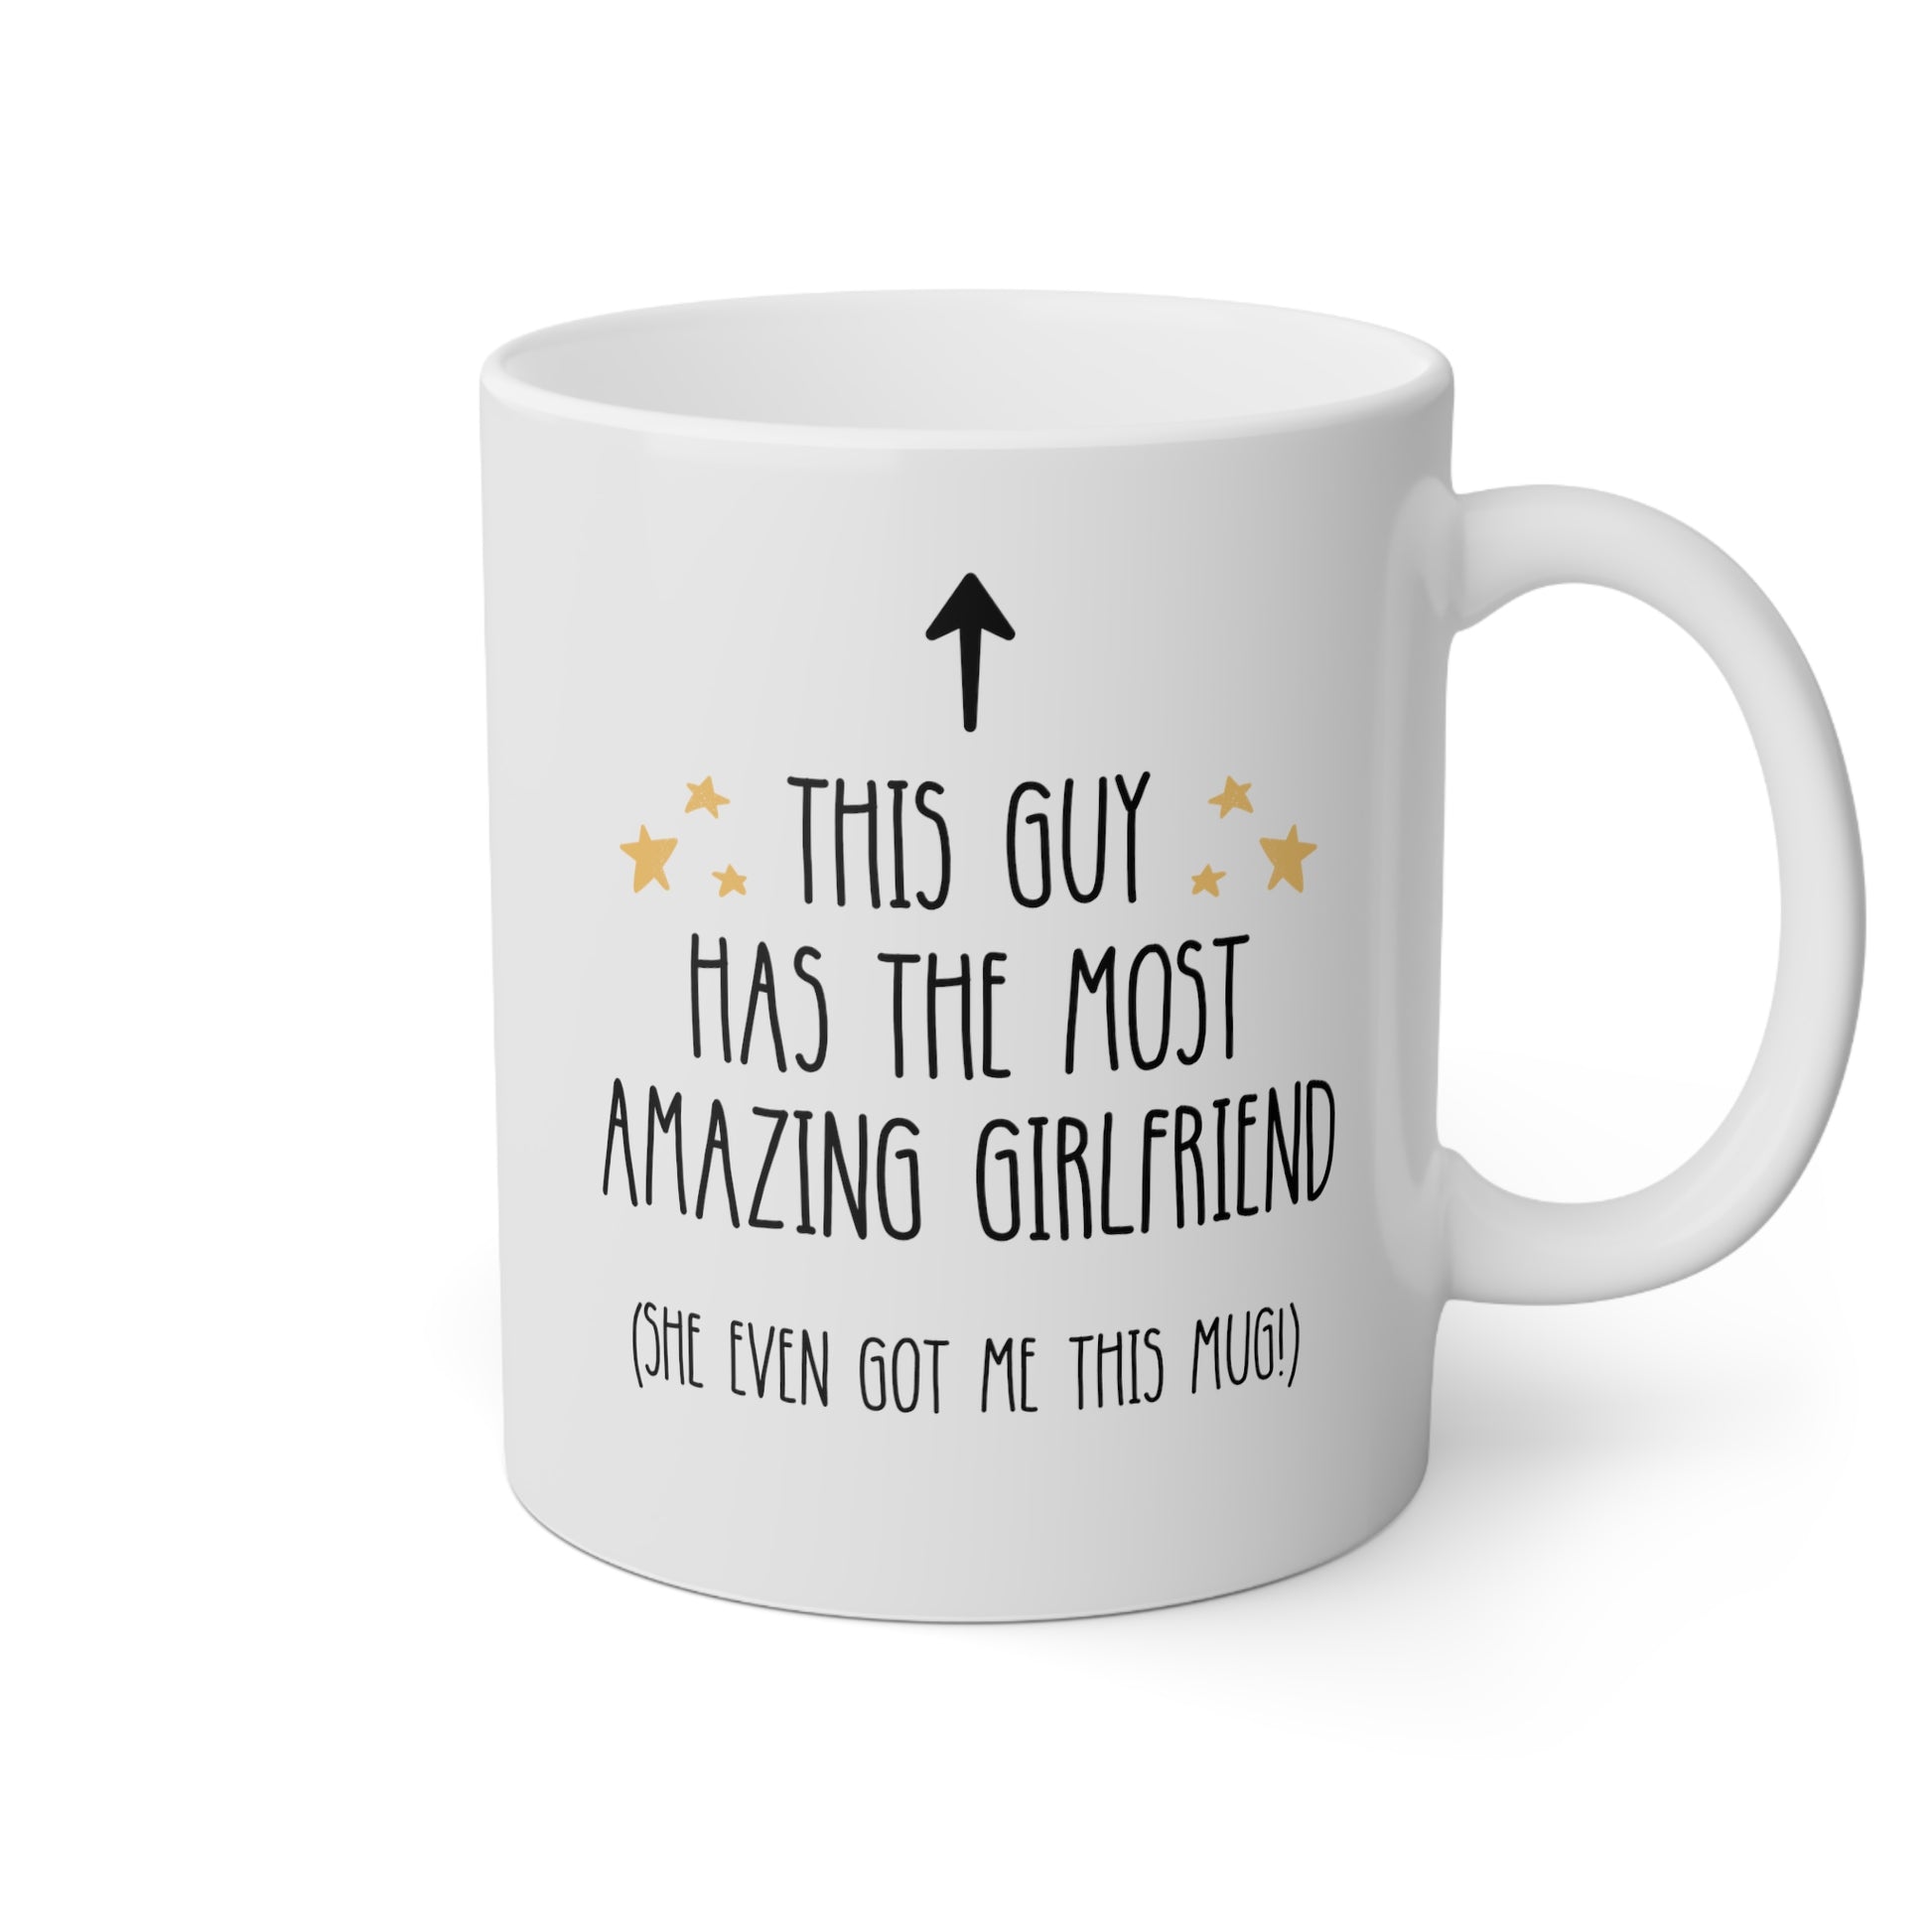 This Guy Has The Most Amazing Girlfriend 11oz white funny large coffee mug gift for boyfriend anniversary valentines him lover waveywares wavey wares wavywares wavy wares